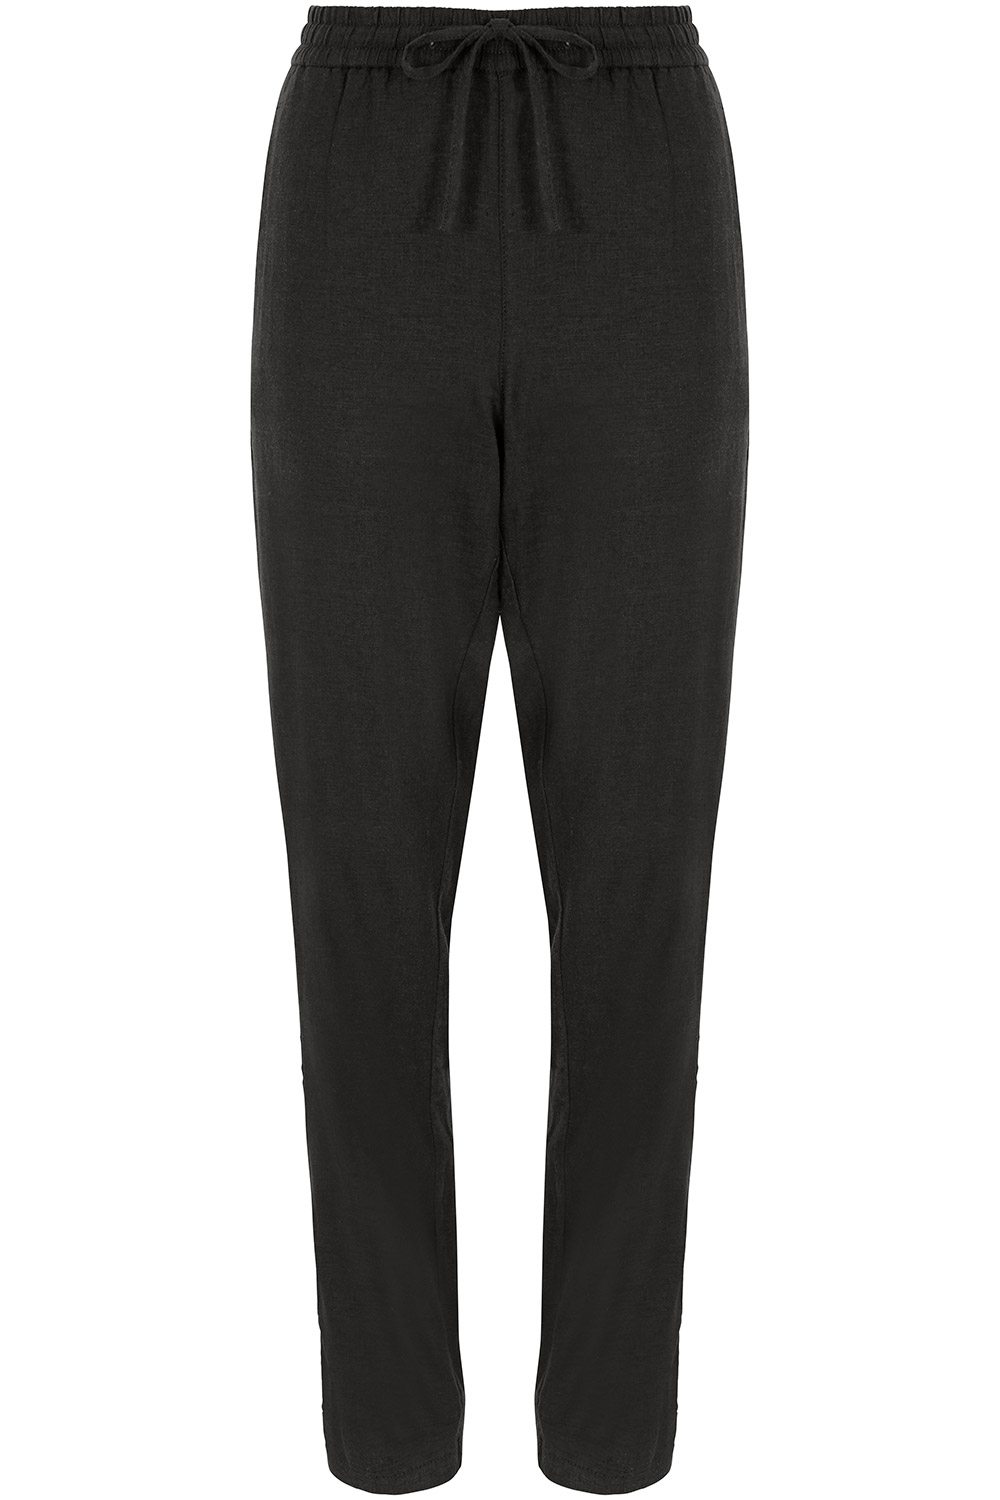 Purton Linen Blend Tapered Trousers Trousers  Leggings  FatFacecom